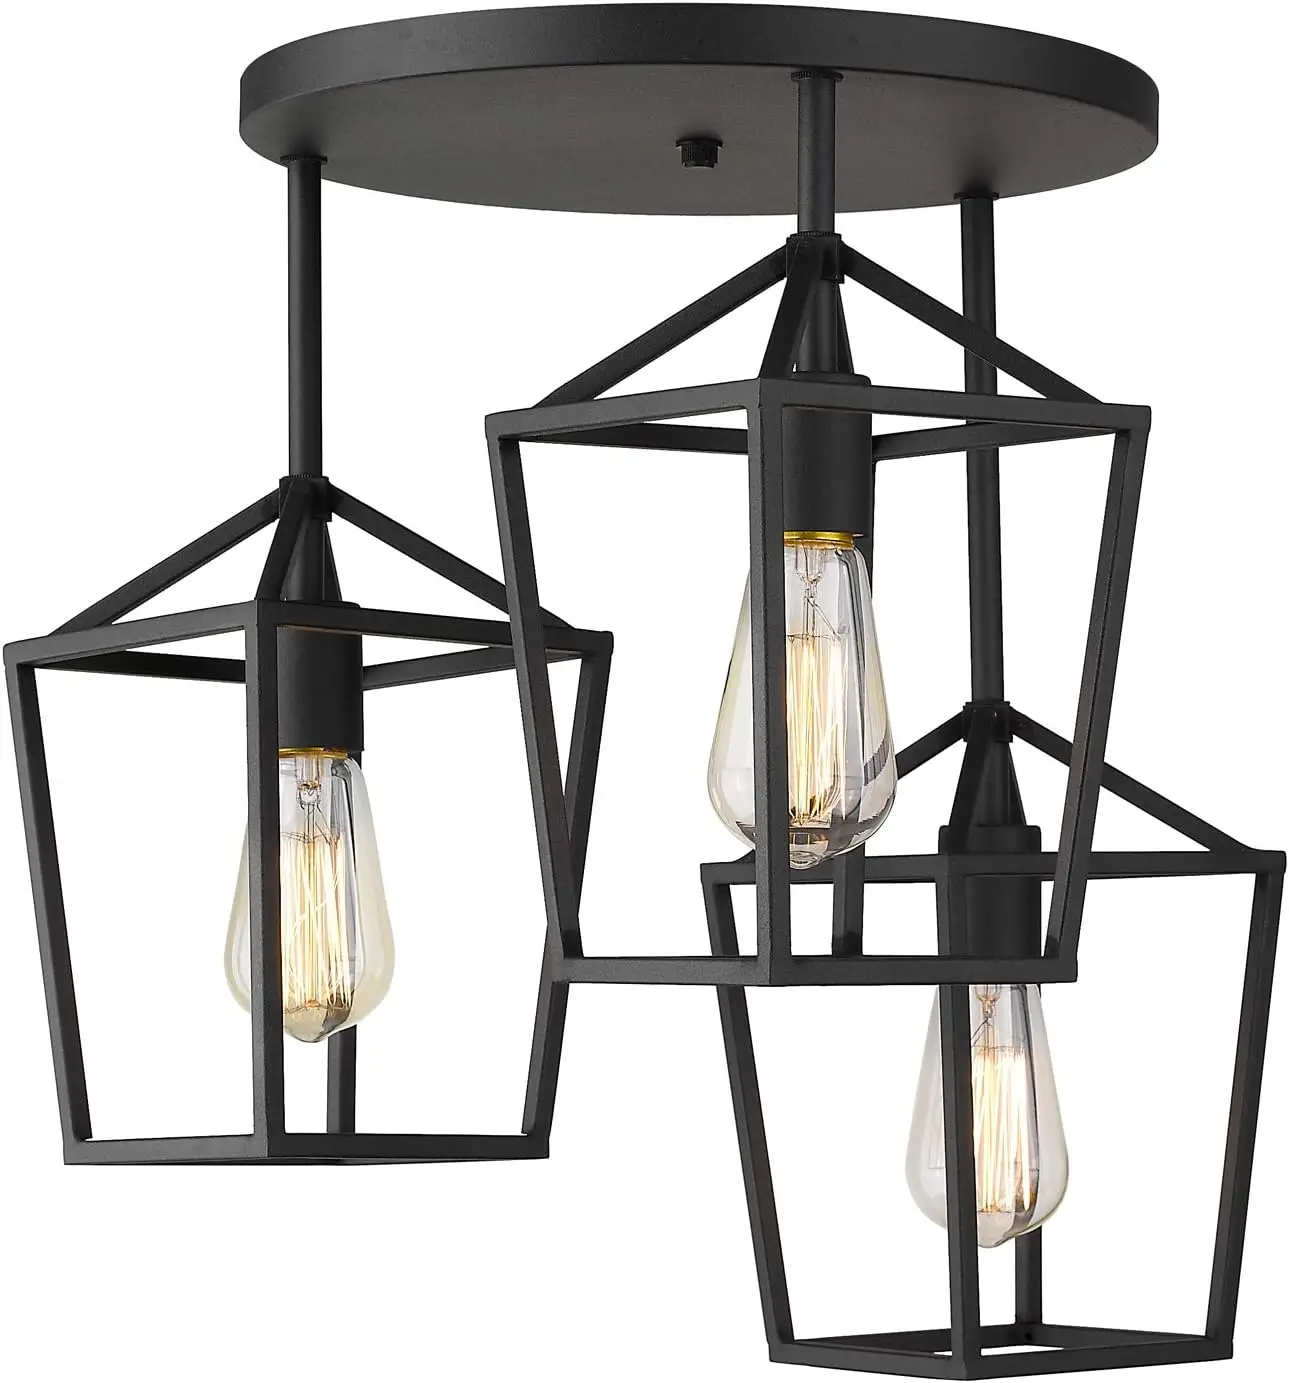 

Ceiling Light, Semi-Flush Mount Light Fixture with Metal Cage in Black Finish, 20065D2-3